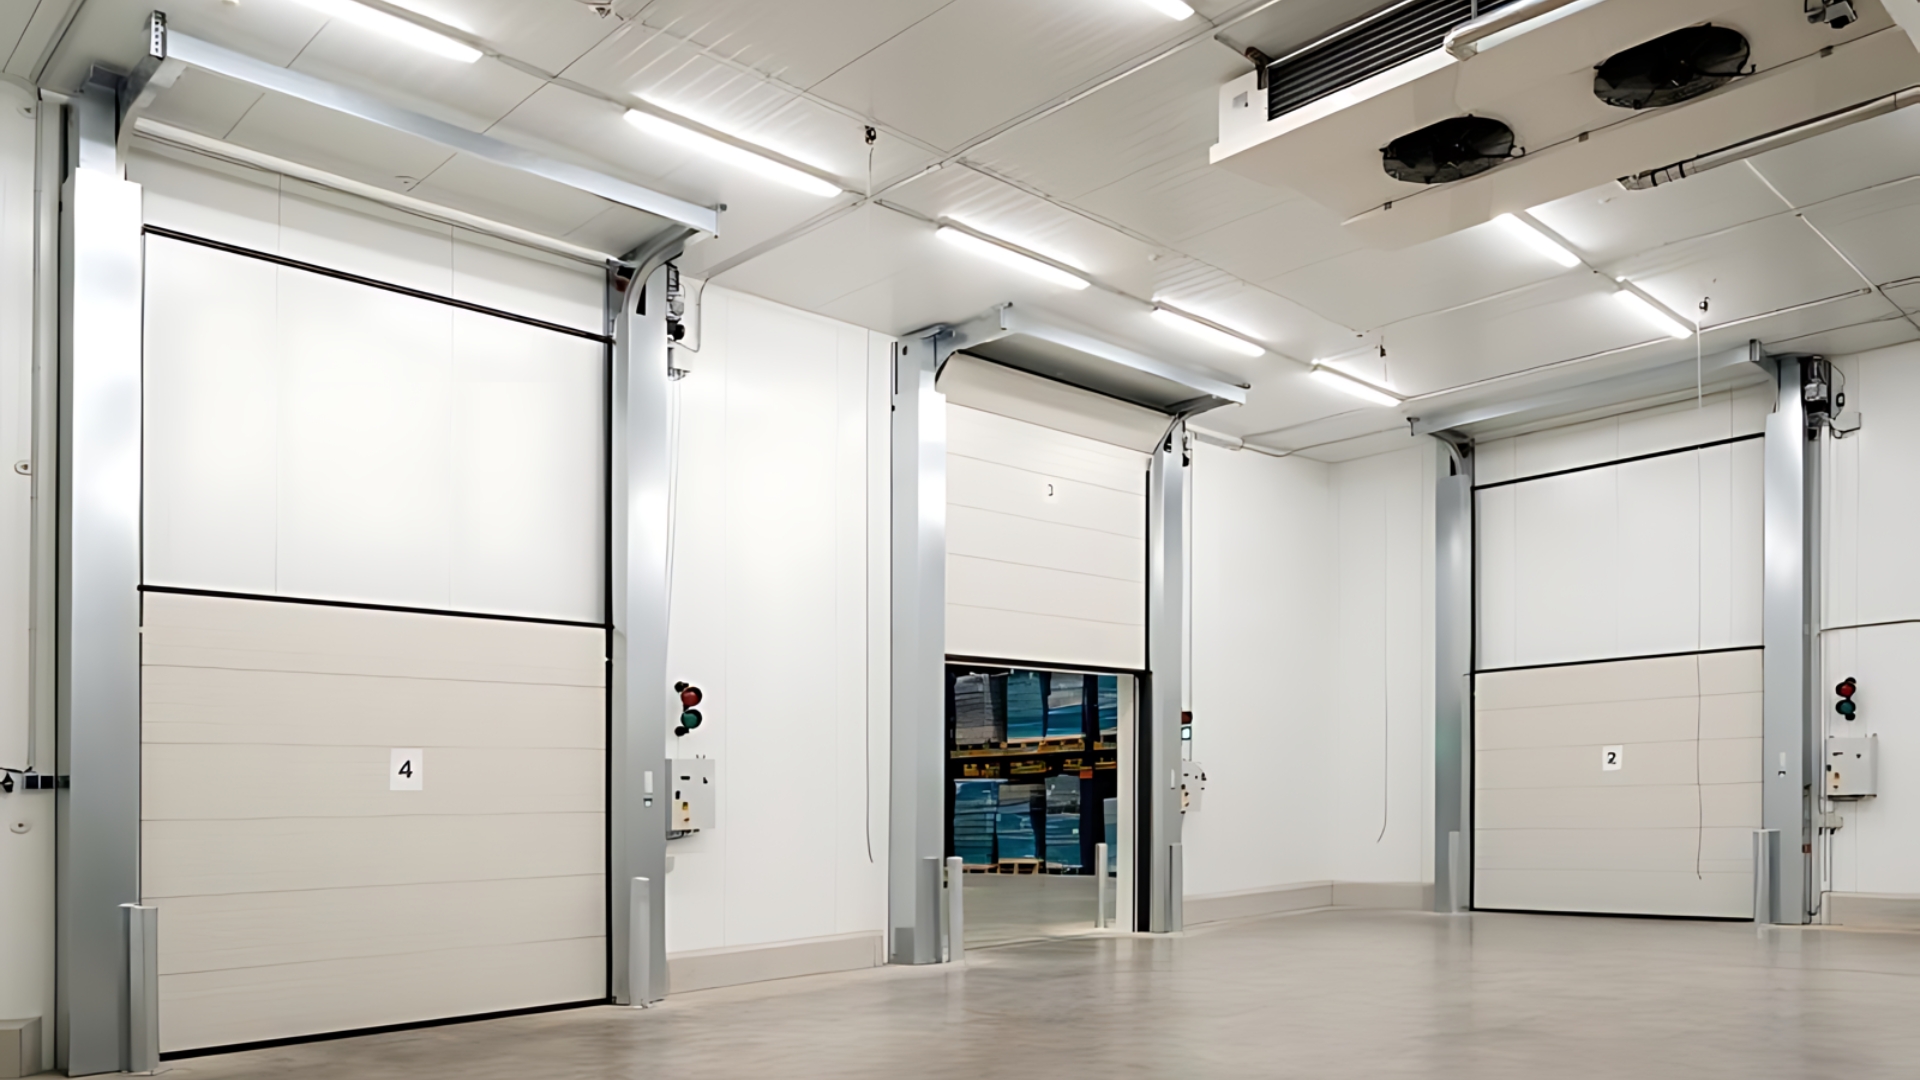 Three high-performance garage doors installed in a warehouse